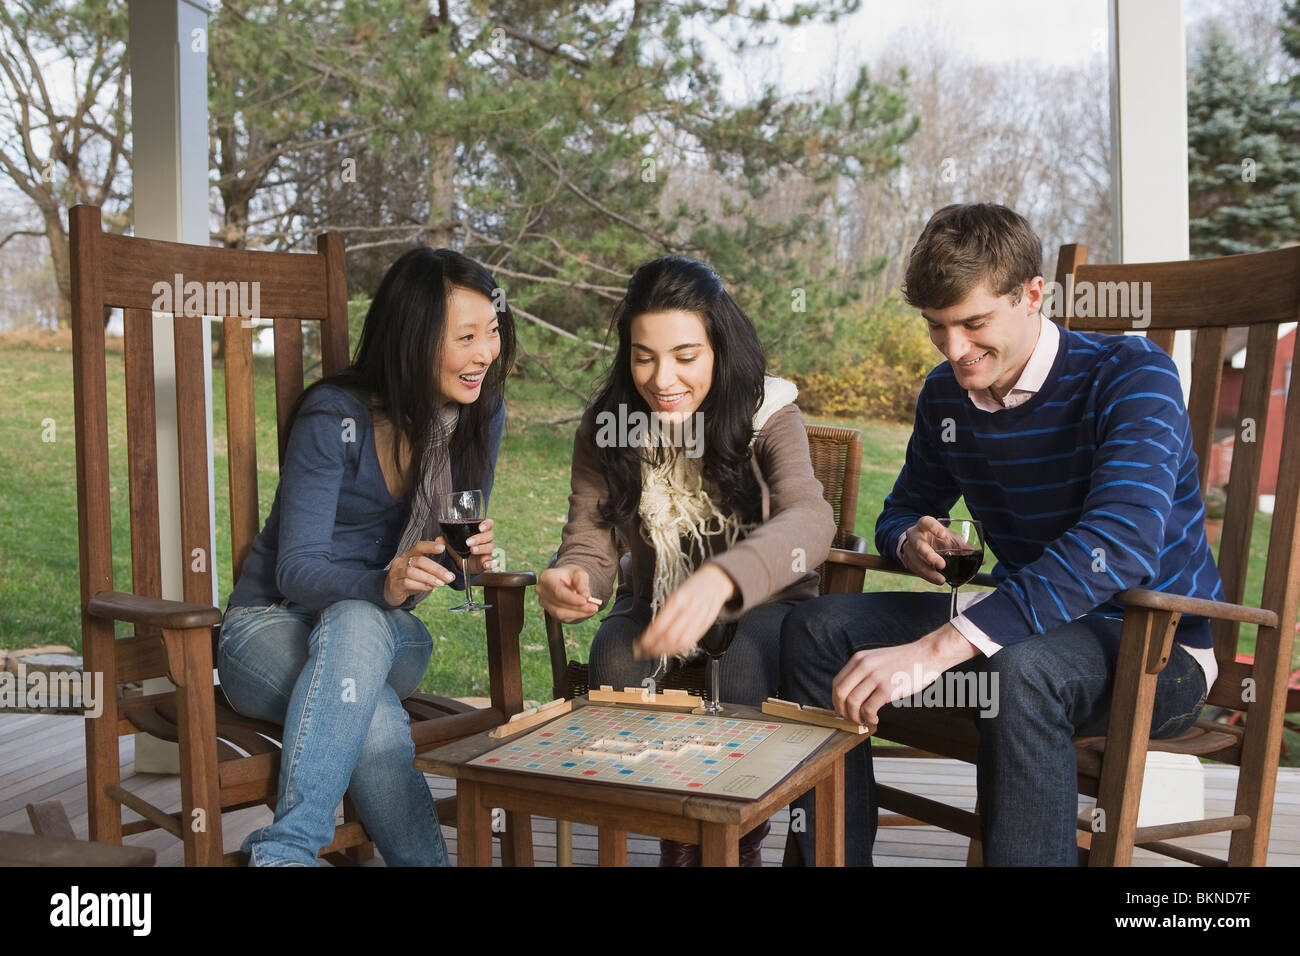 Friends playing scrabble on porch Stock Photo